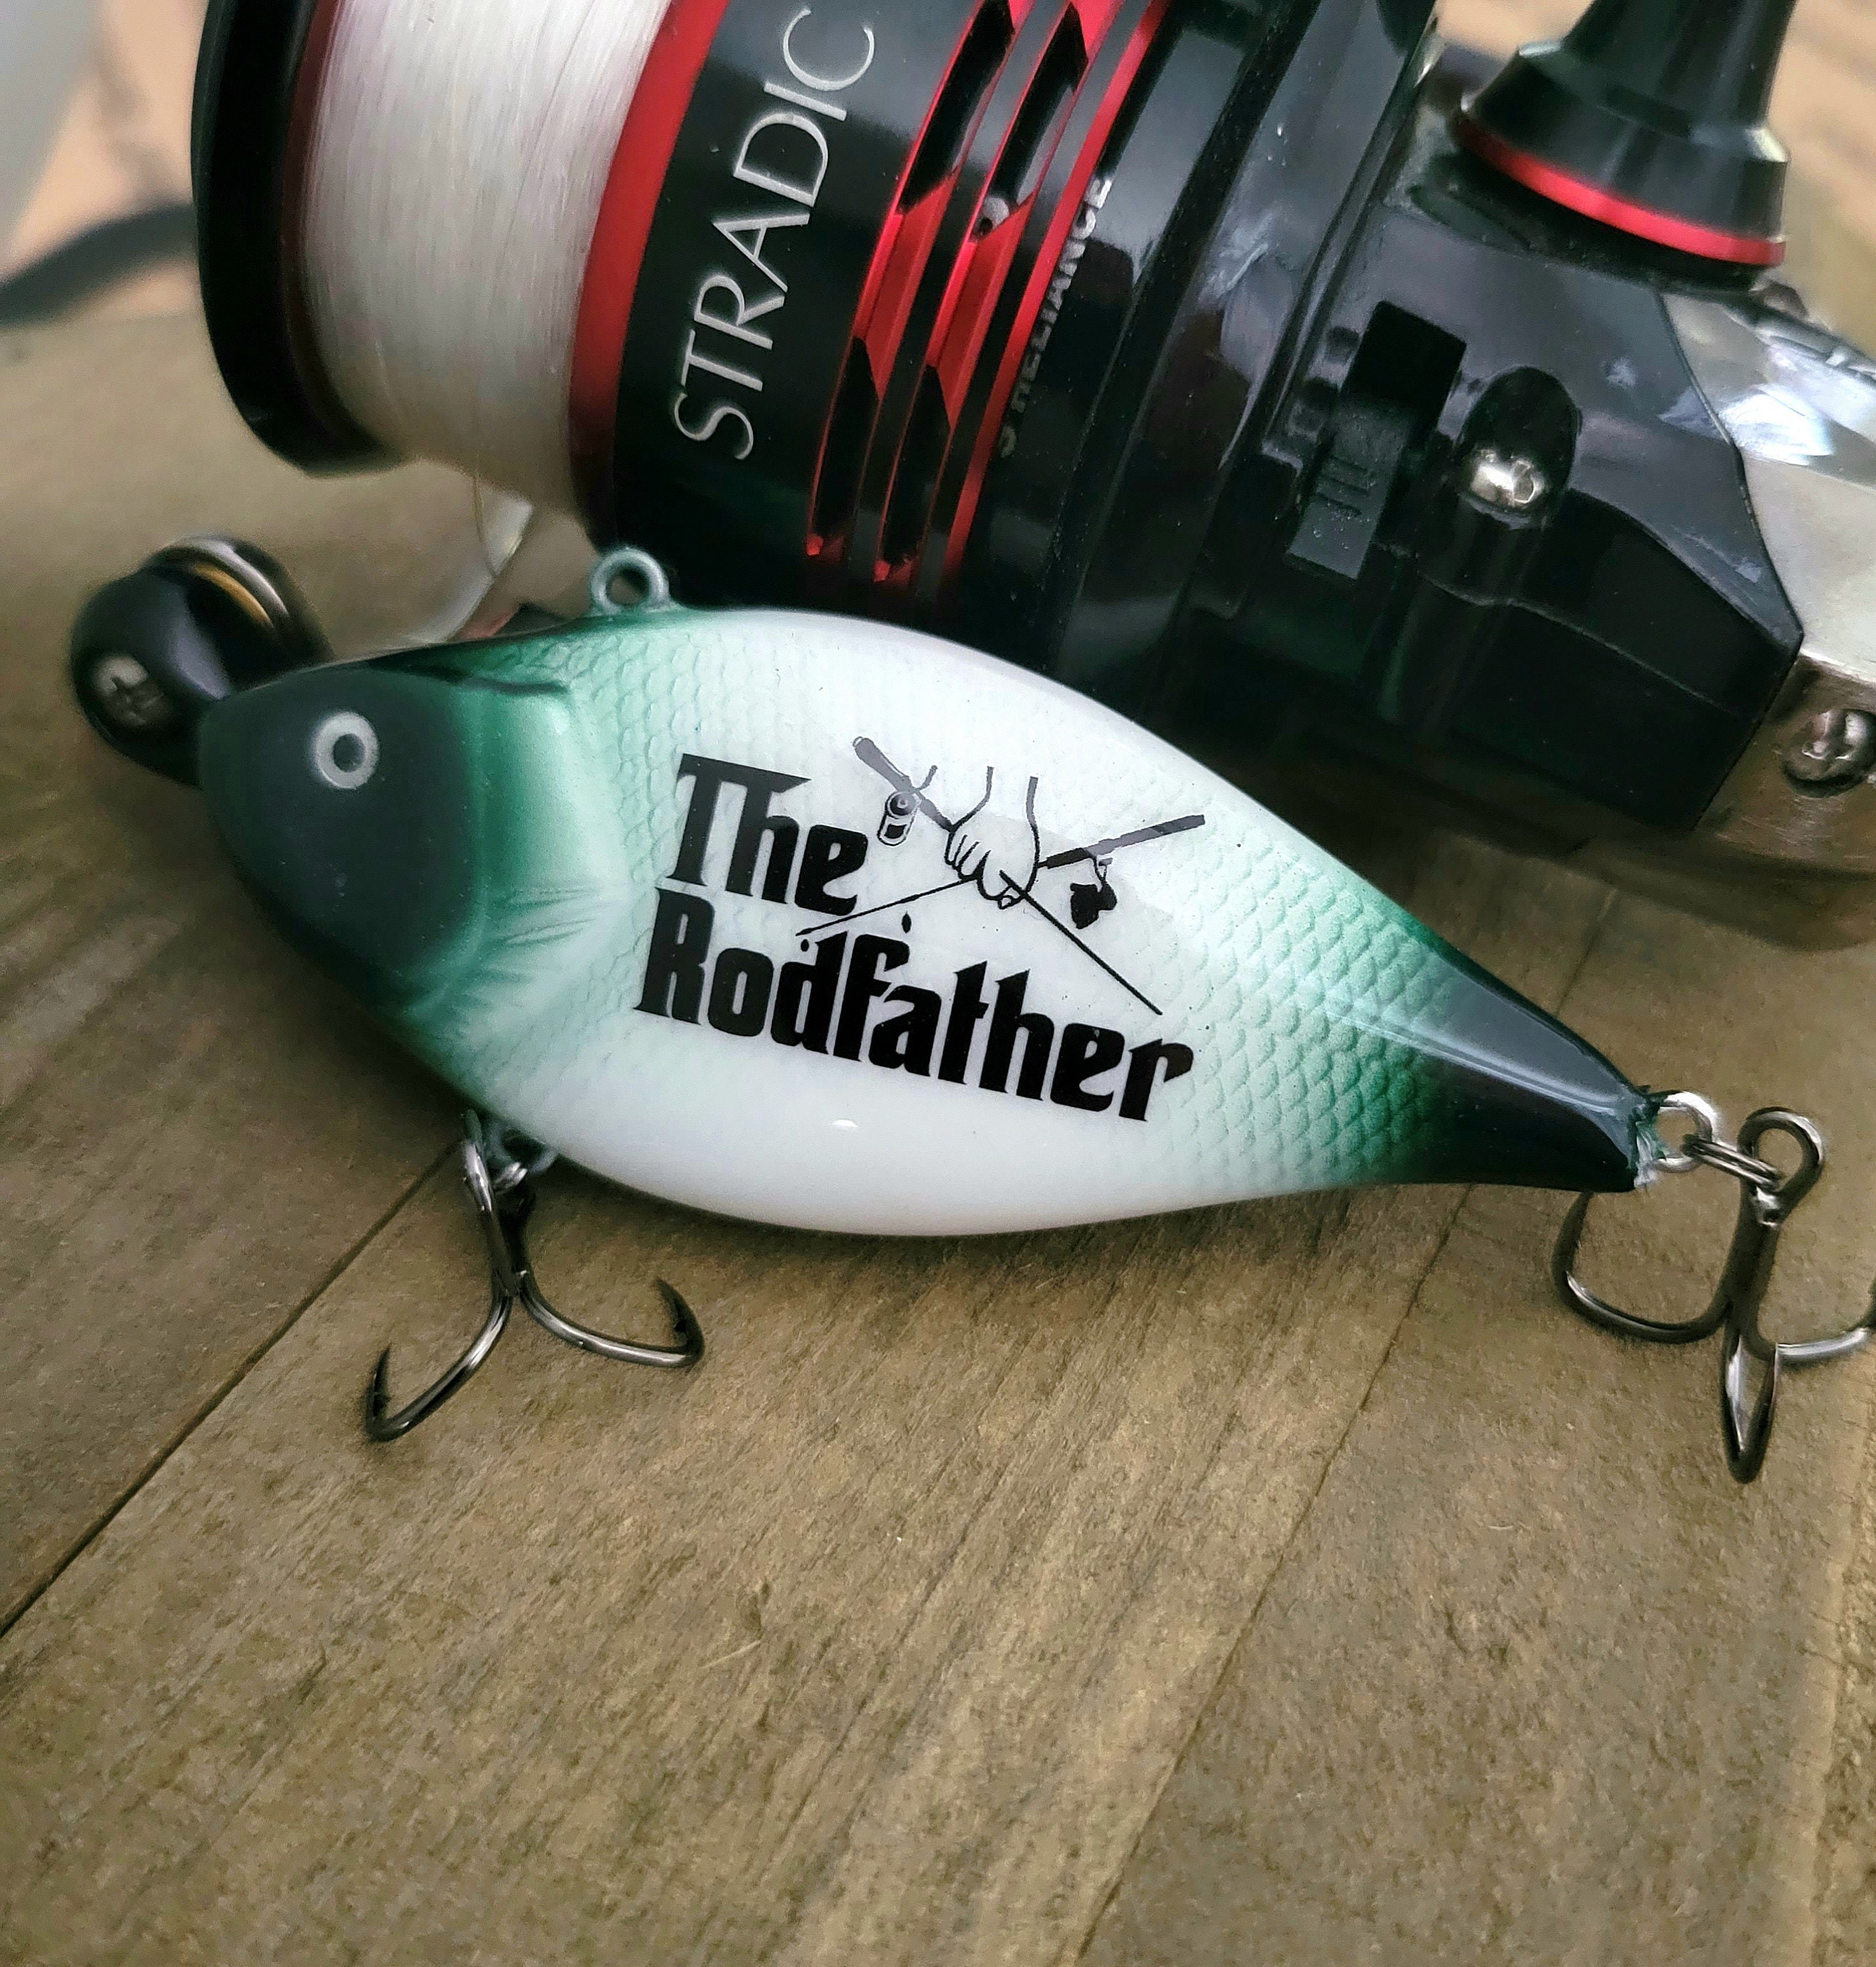 Custom Made Fishing Lure Personalized With Names and Dates. Our rodafather  Lure Make the Perfect Gift for Any Fisherman. Great Bass Lure -  Sweden